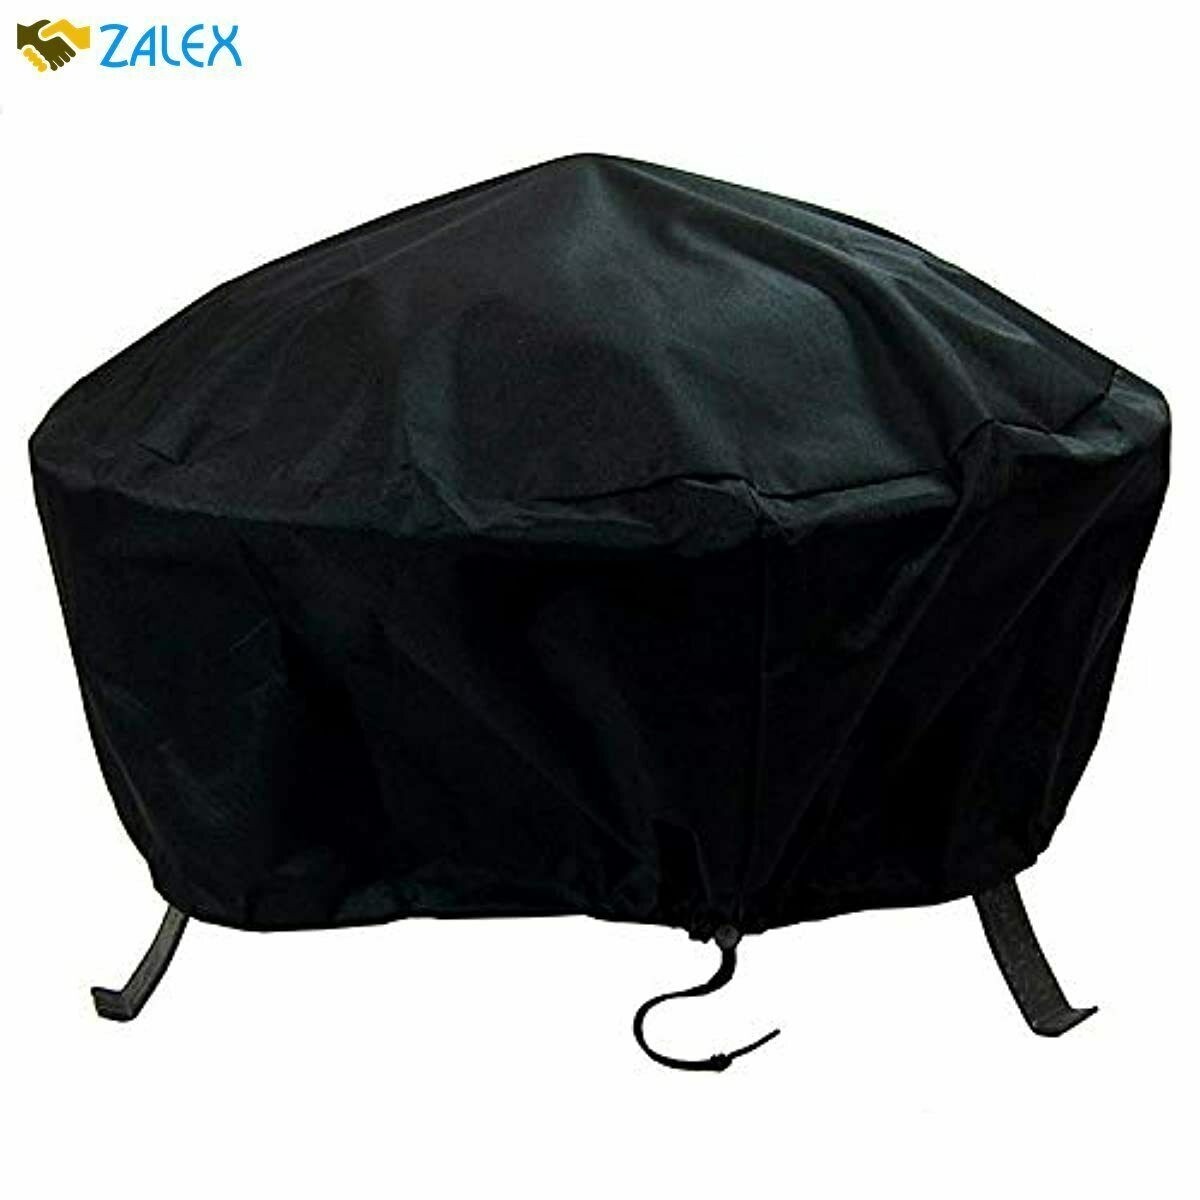 Heavy Duty 420D PVC Oxford Fabric Windproof Anti-UV Patio Furniture Cover for Round Outdoor Dining Table Chairs 75D x 31.5H Outdoor Furniture Covers Waterproof Tesmotor Patio Furniture Covers Round Patio Table Cover 